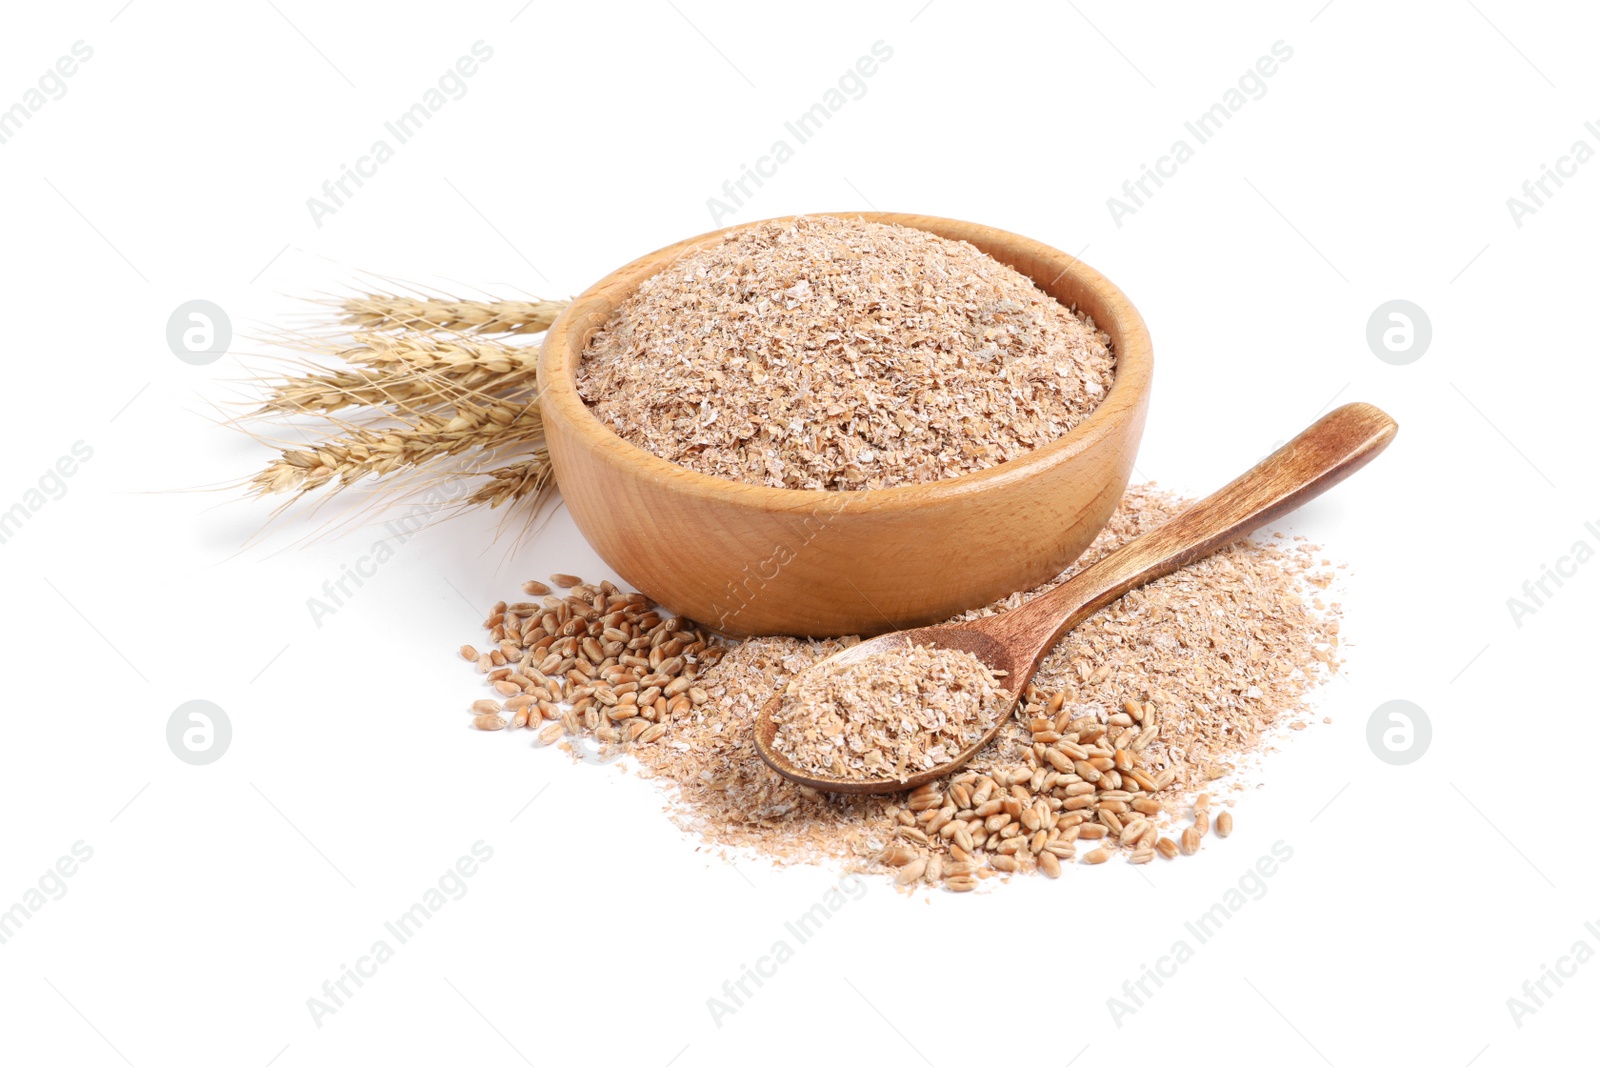 Photo of Wheat bran and spikelets on white background